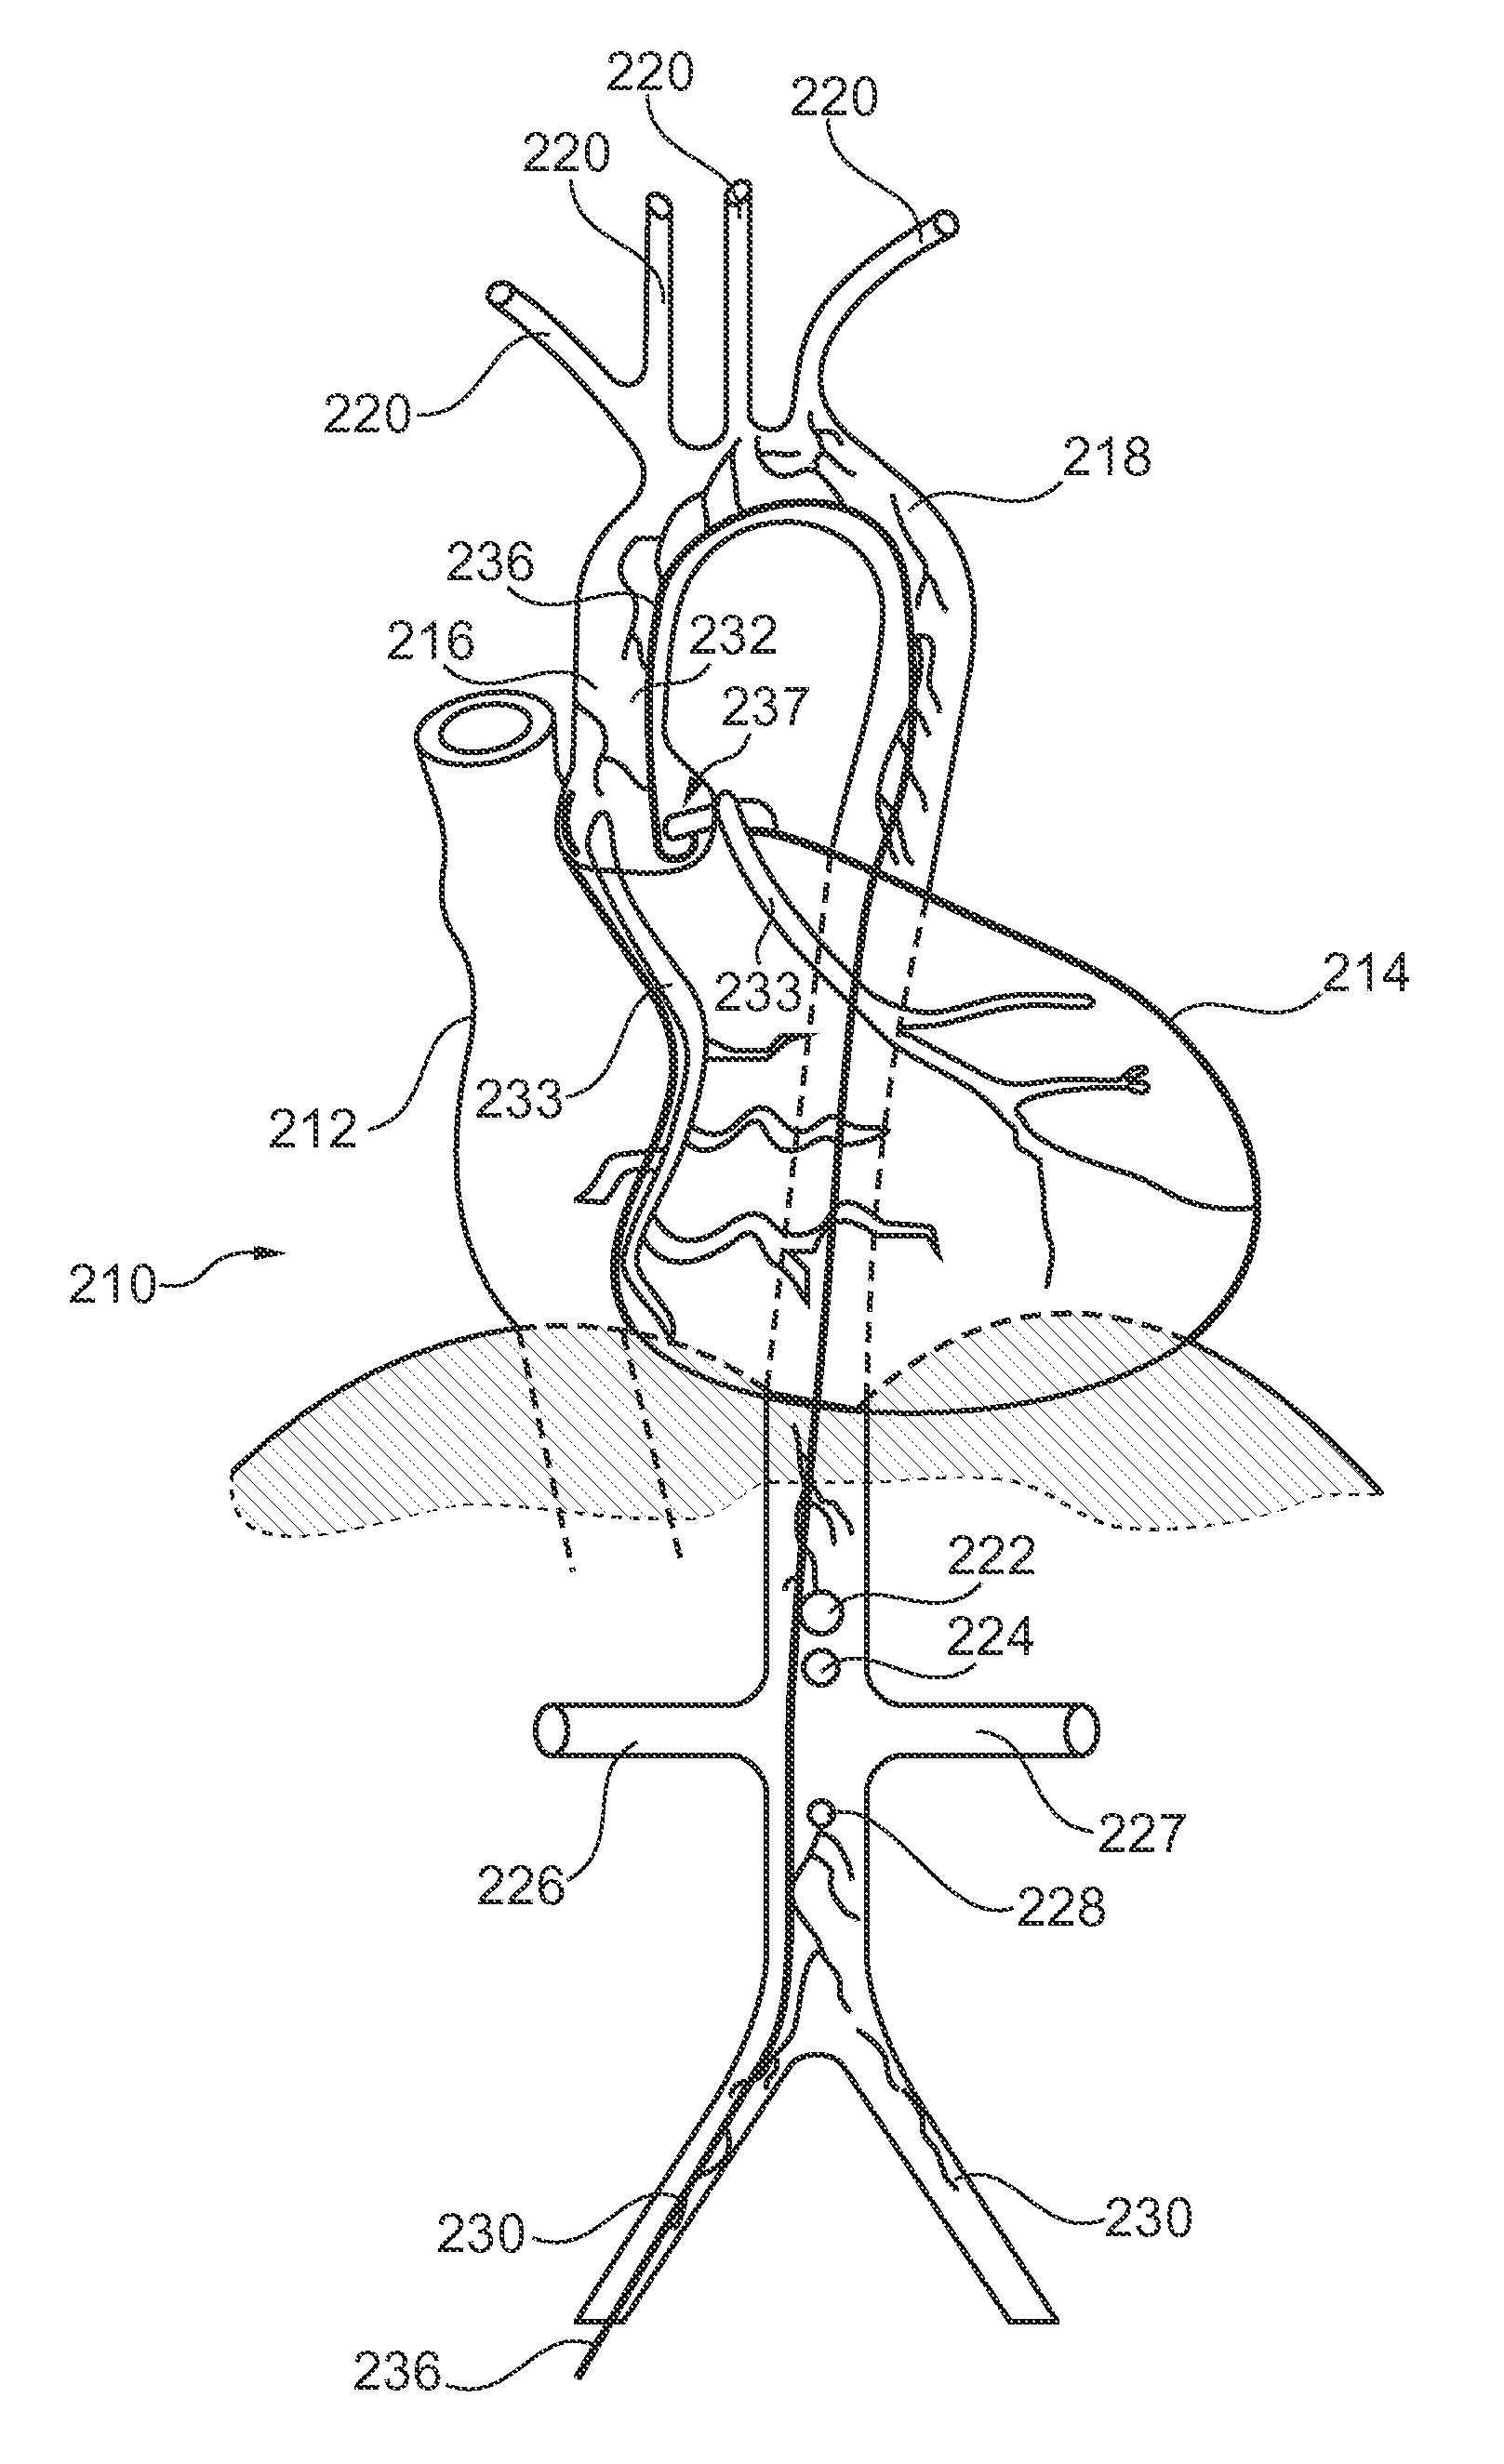 Medical imaging device for providing an image representation supporting the accurate positioning of an invention device in vessel intervention procedures